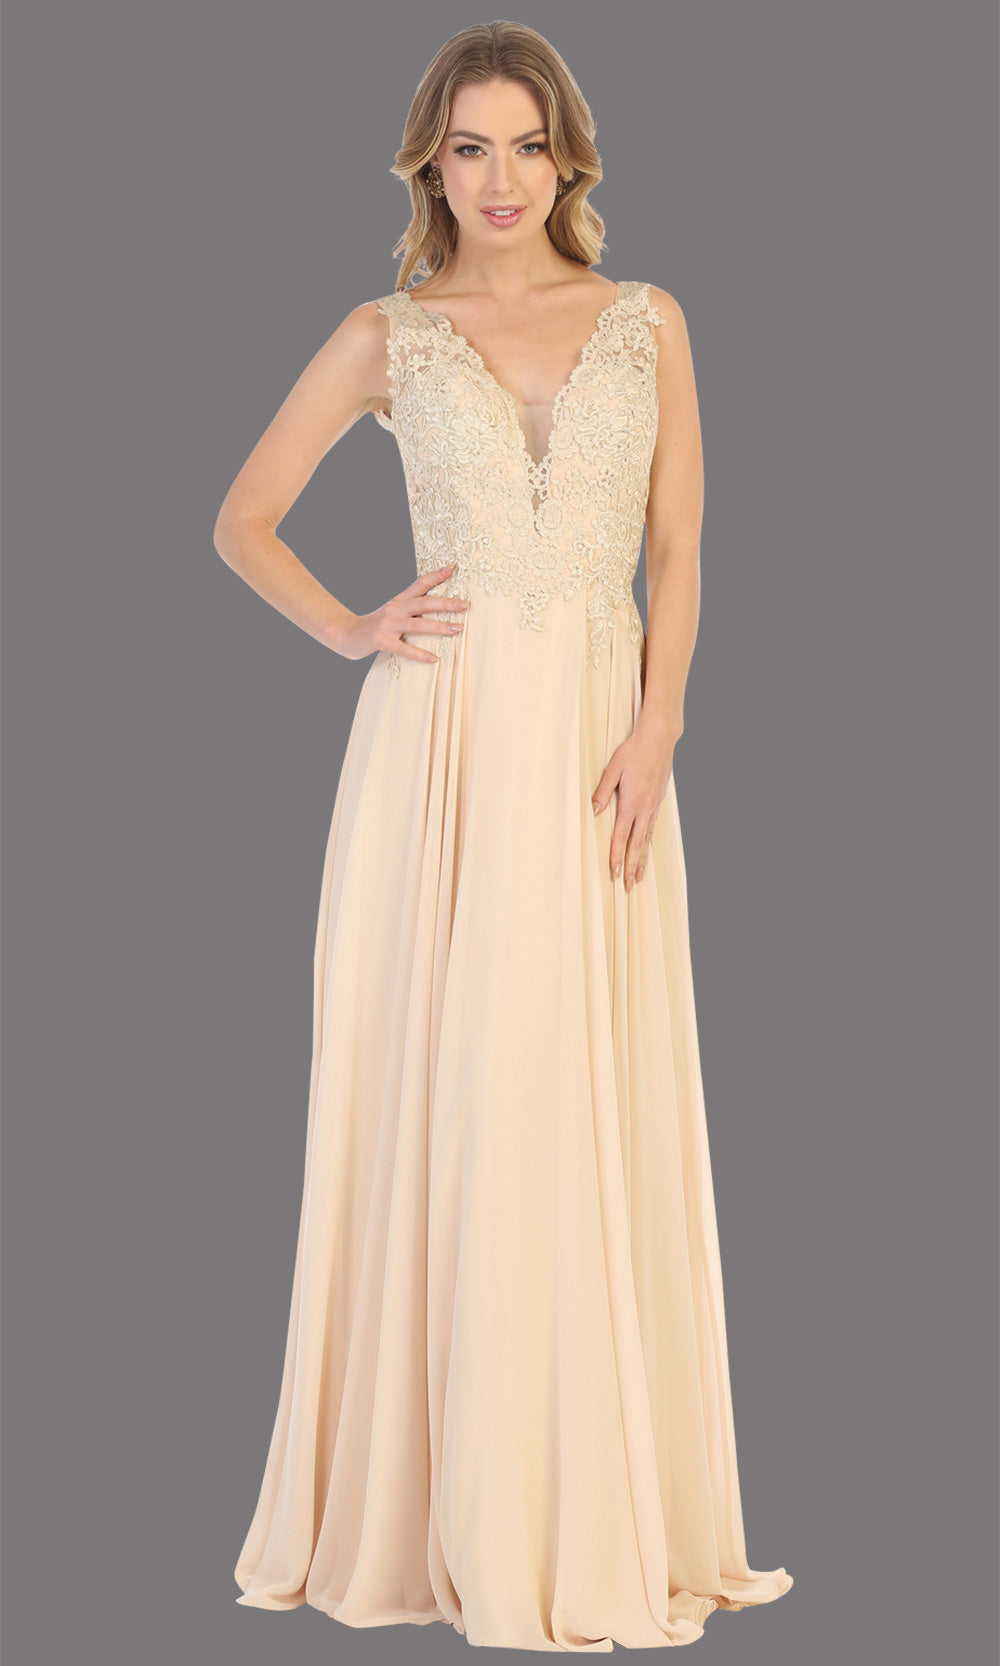 Mayqueen MQ1754 long champagne gold flowy sleek & sexy dress w/straps. This light gold dress is perfect for bridesmaid dresses, simple wedding guest dress, prom dress, gala, black tie wedding. Plus sizes are available, evening party dress.jpg